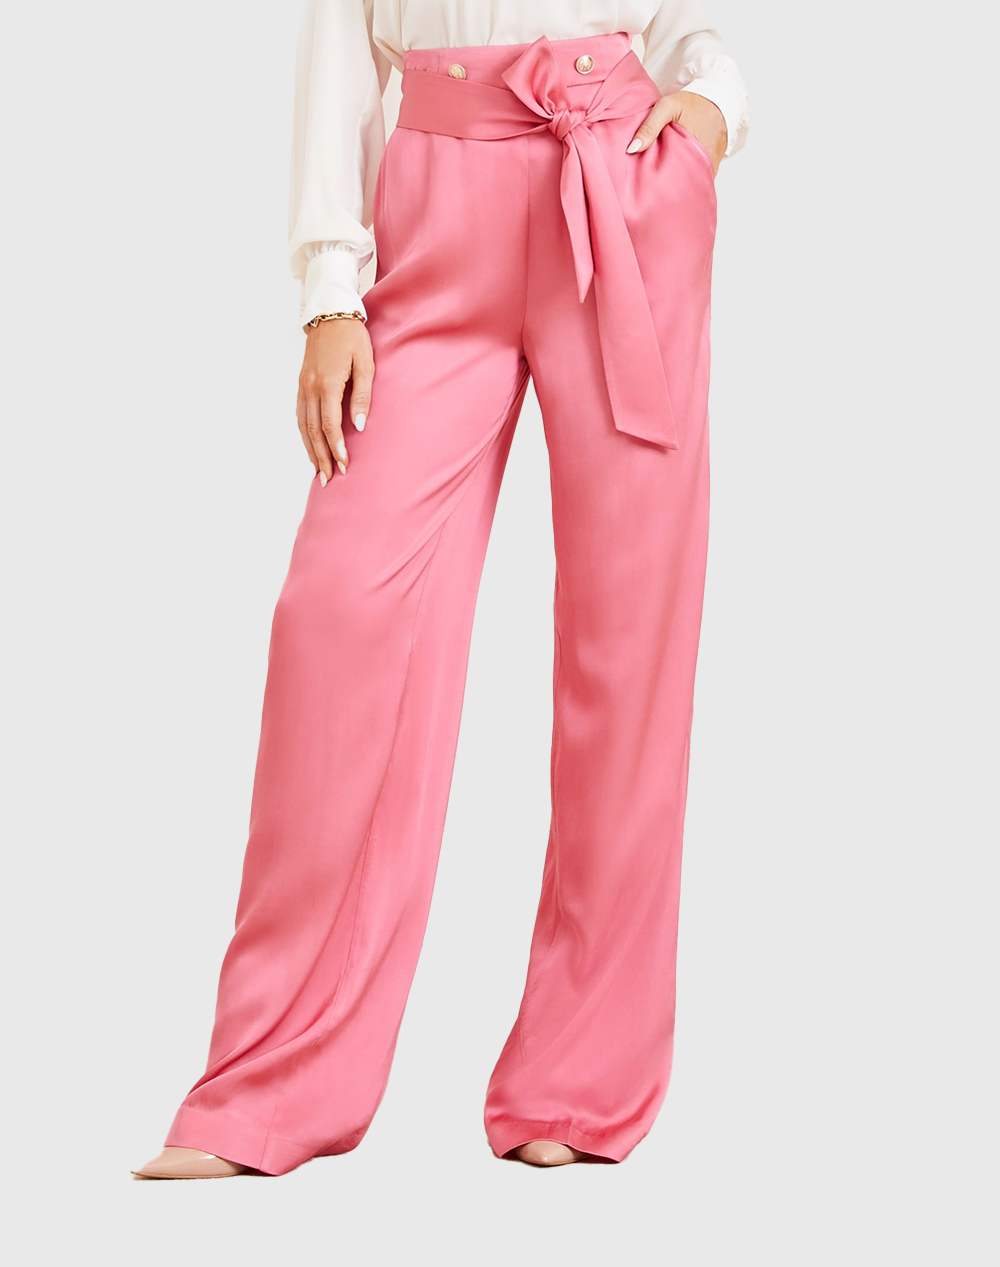 GUESS MARCIANO ANASTASIA PANT ΠΑΝΤΕΛΟΝΙ ΓΥΝΑΙΚΕΙΟ 4RGB039999Z-G65P Pink